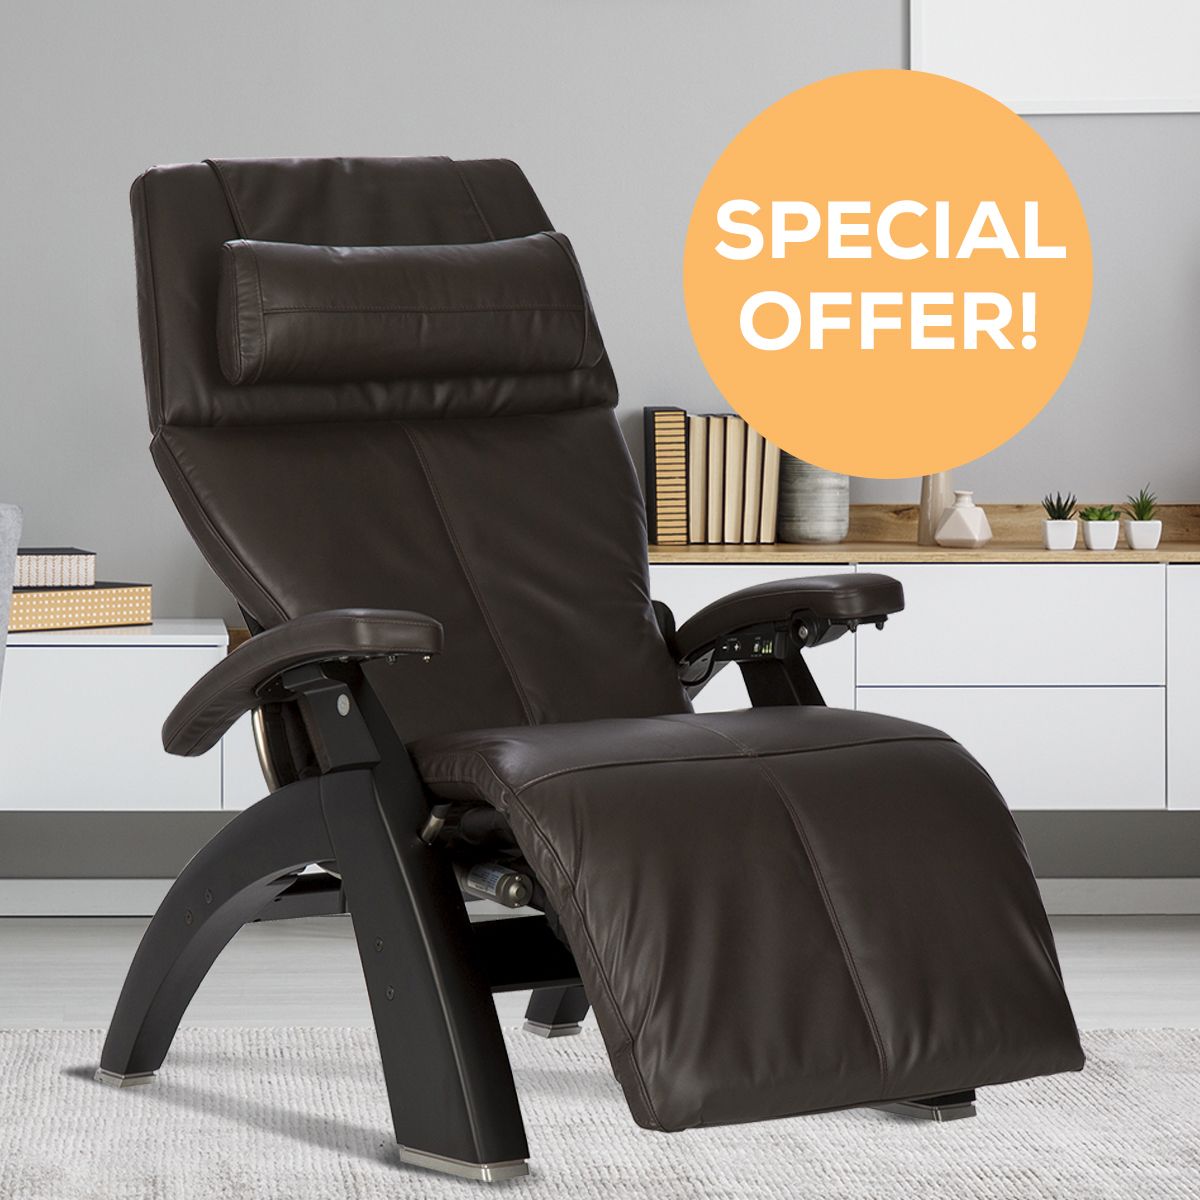 Perfect Chair® PC-600 Silhouette